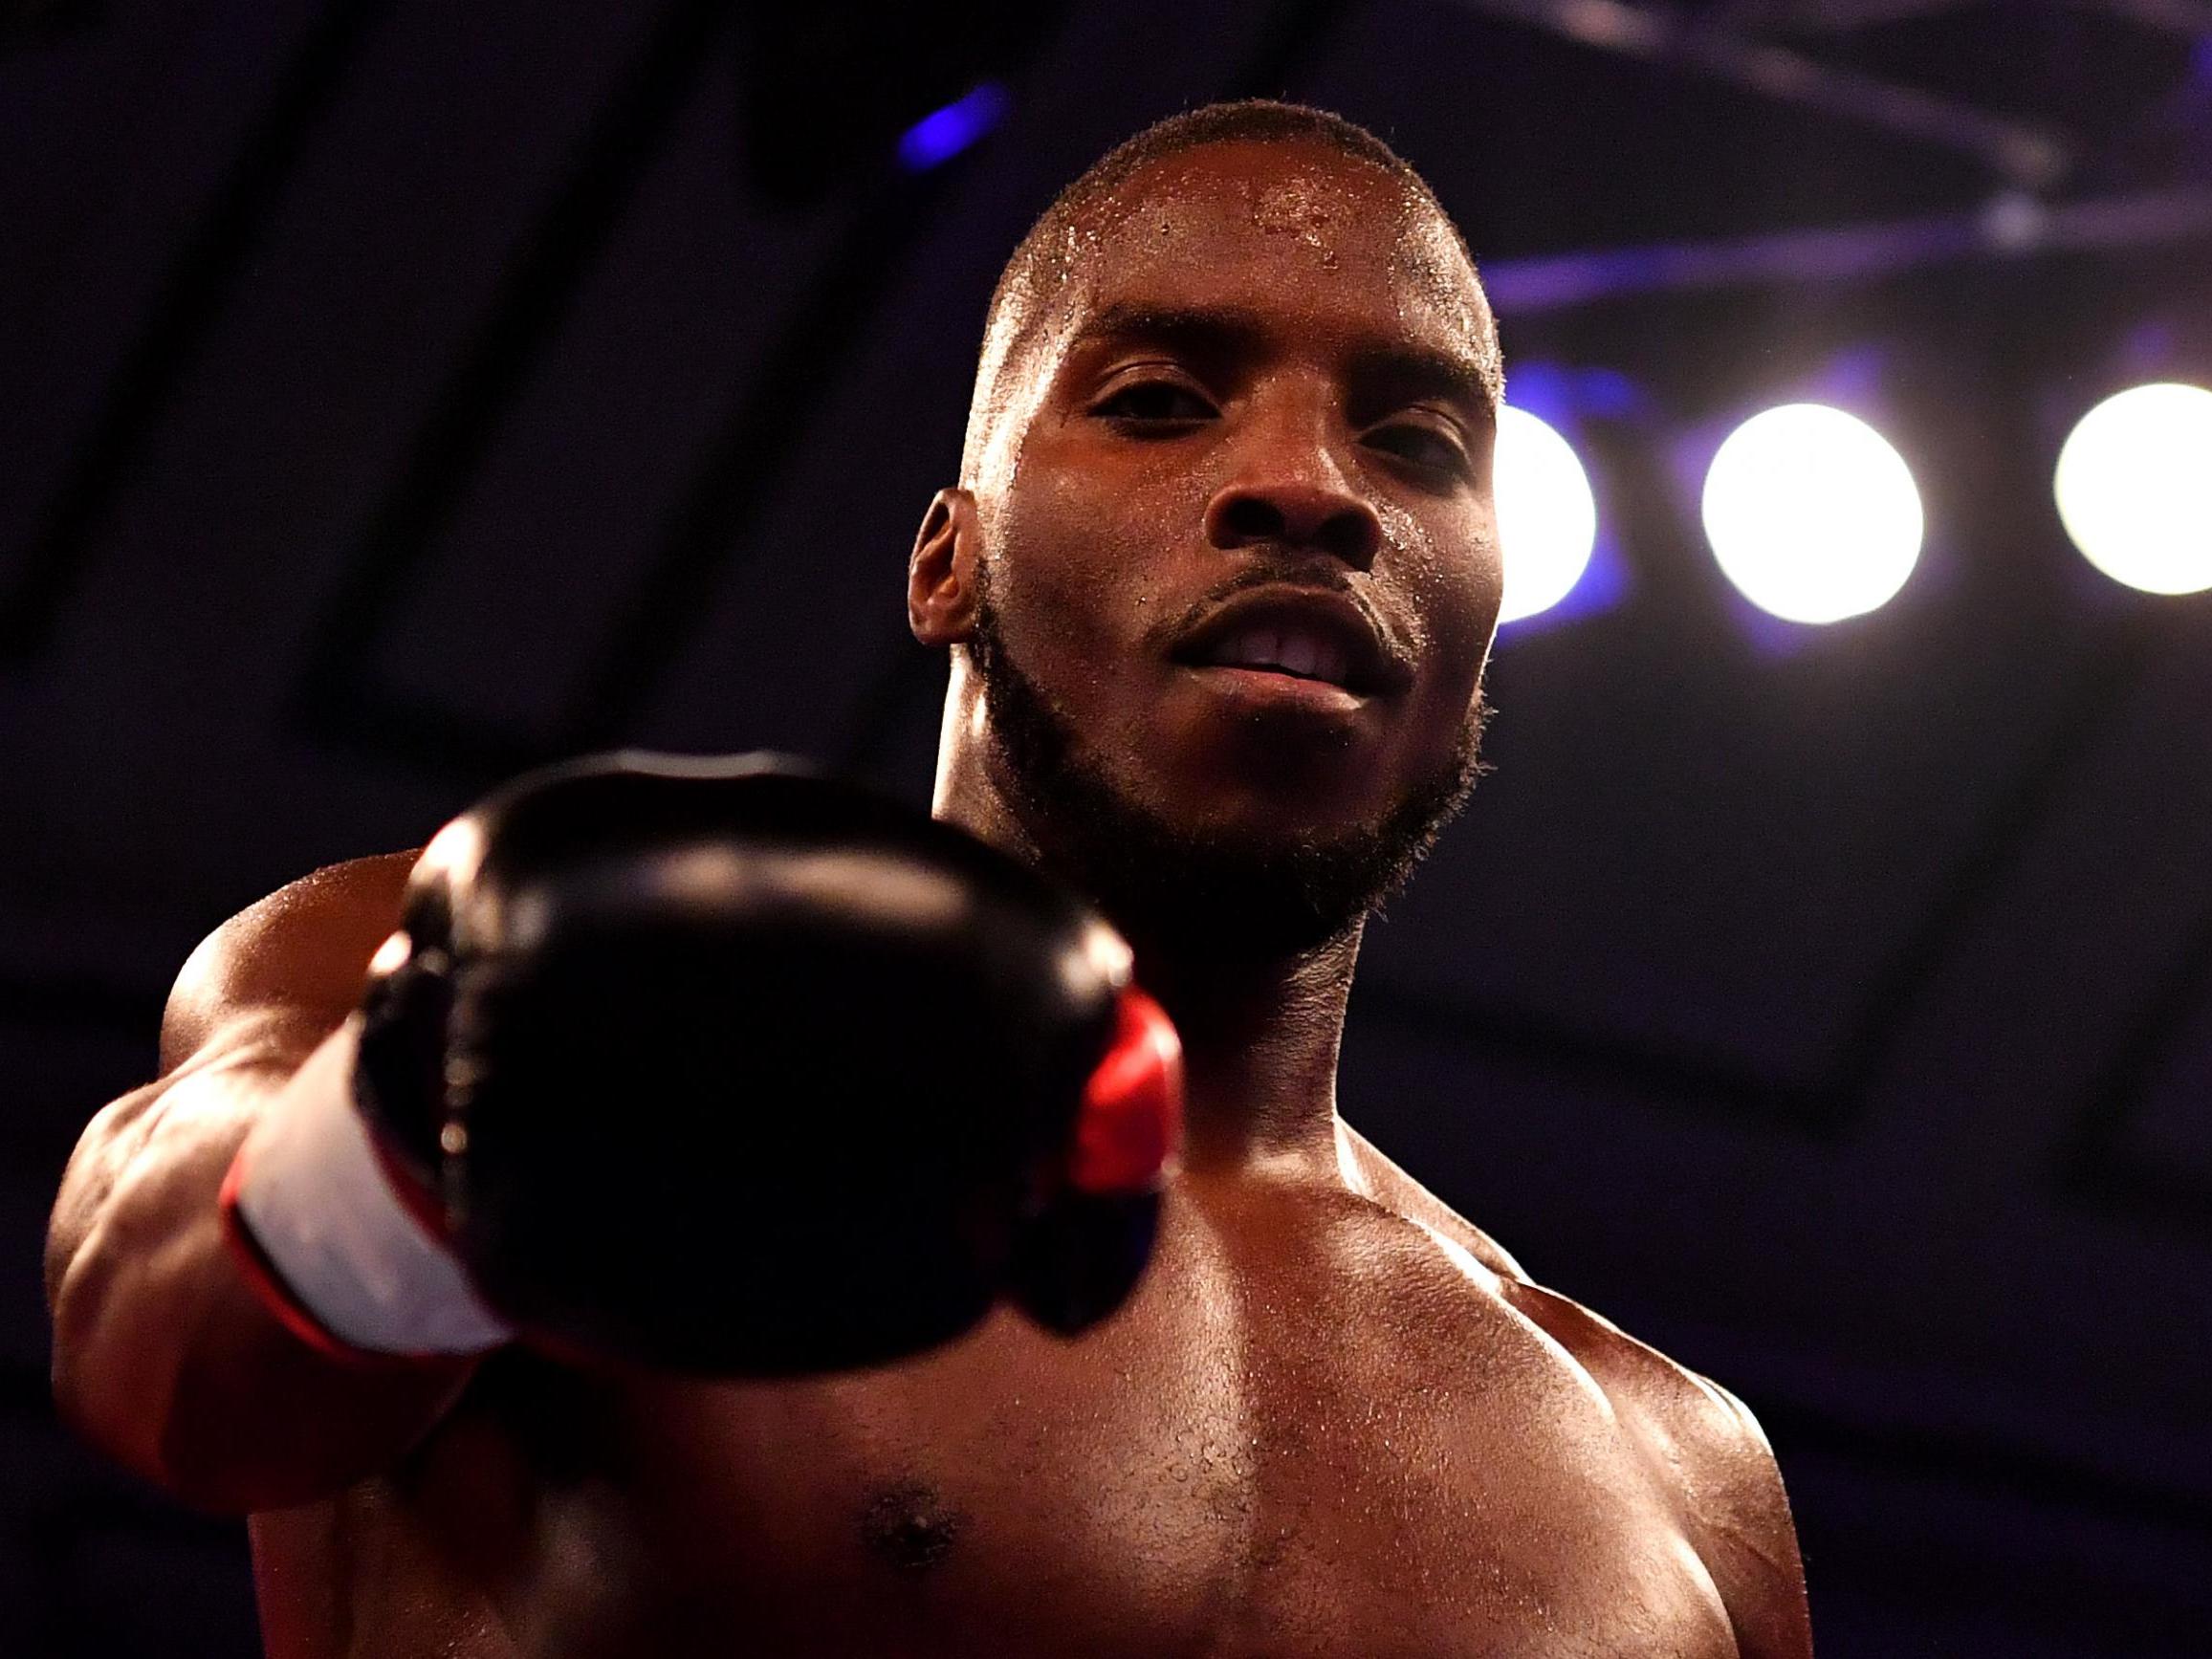 There's more than meets the eye to Lawrence Okolie